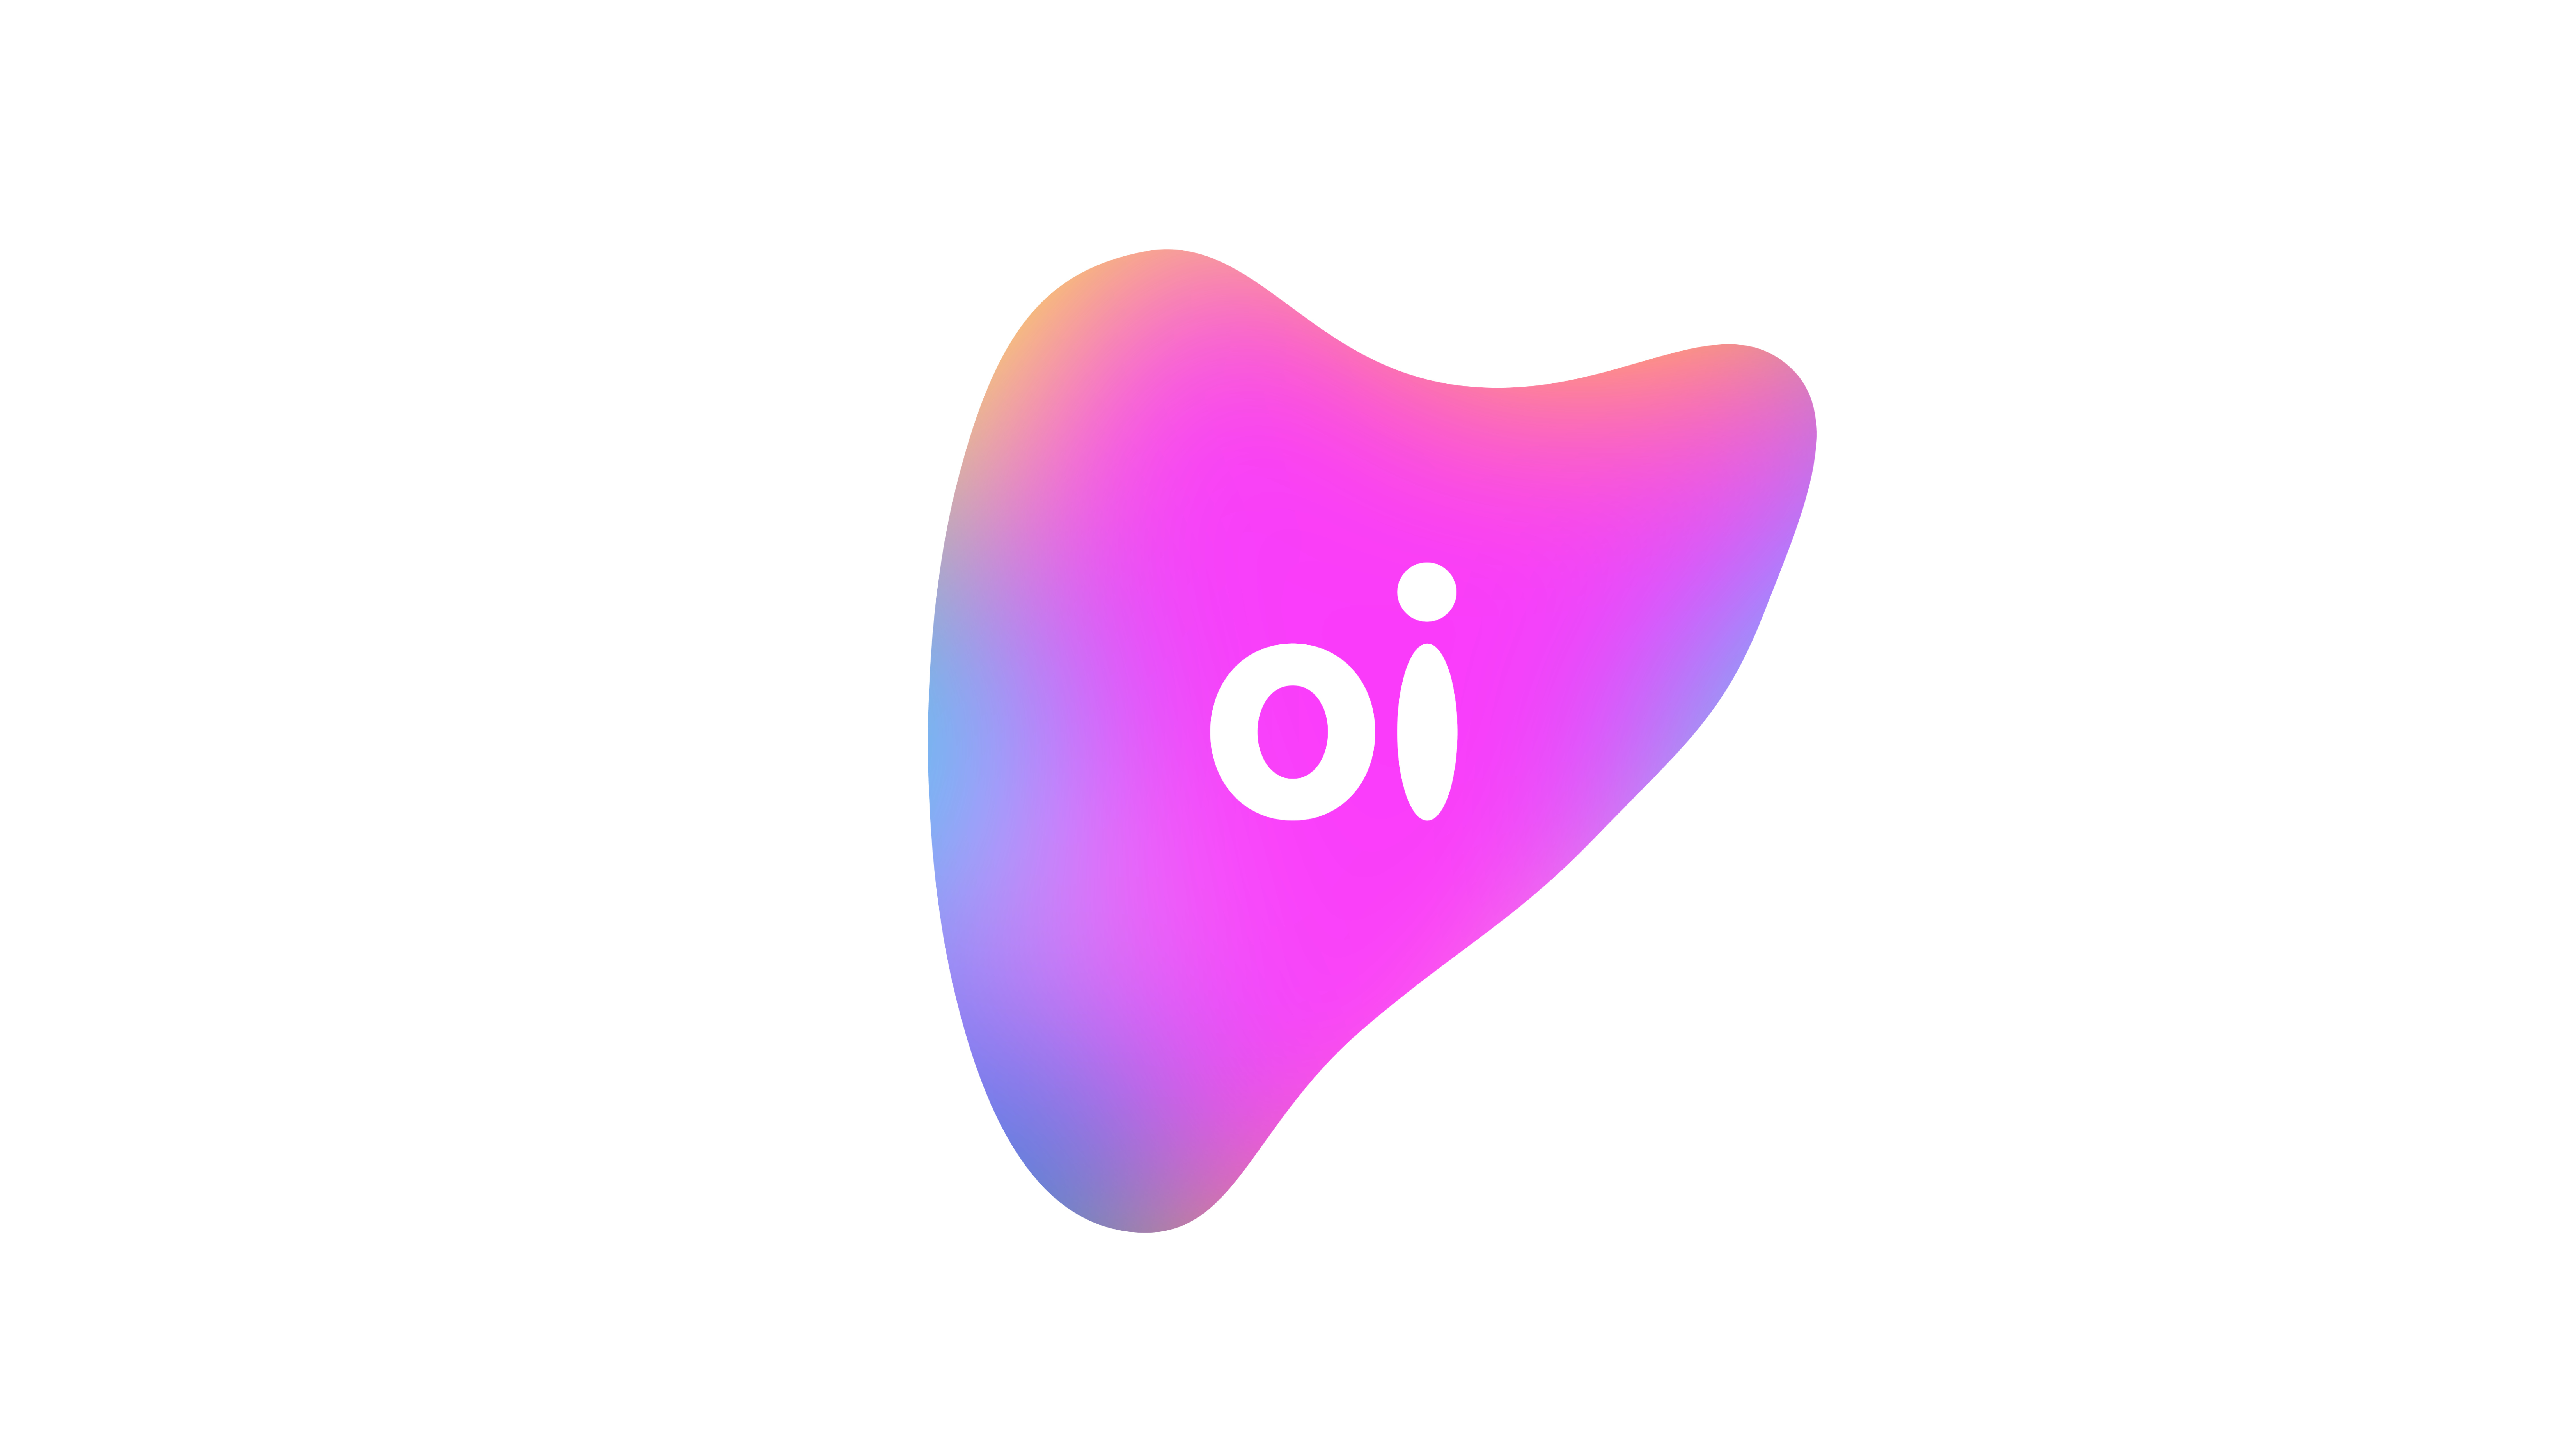 Oi!" – Wolff Olins designs telecoms logo which reacts to the human ...